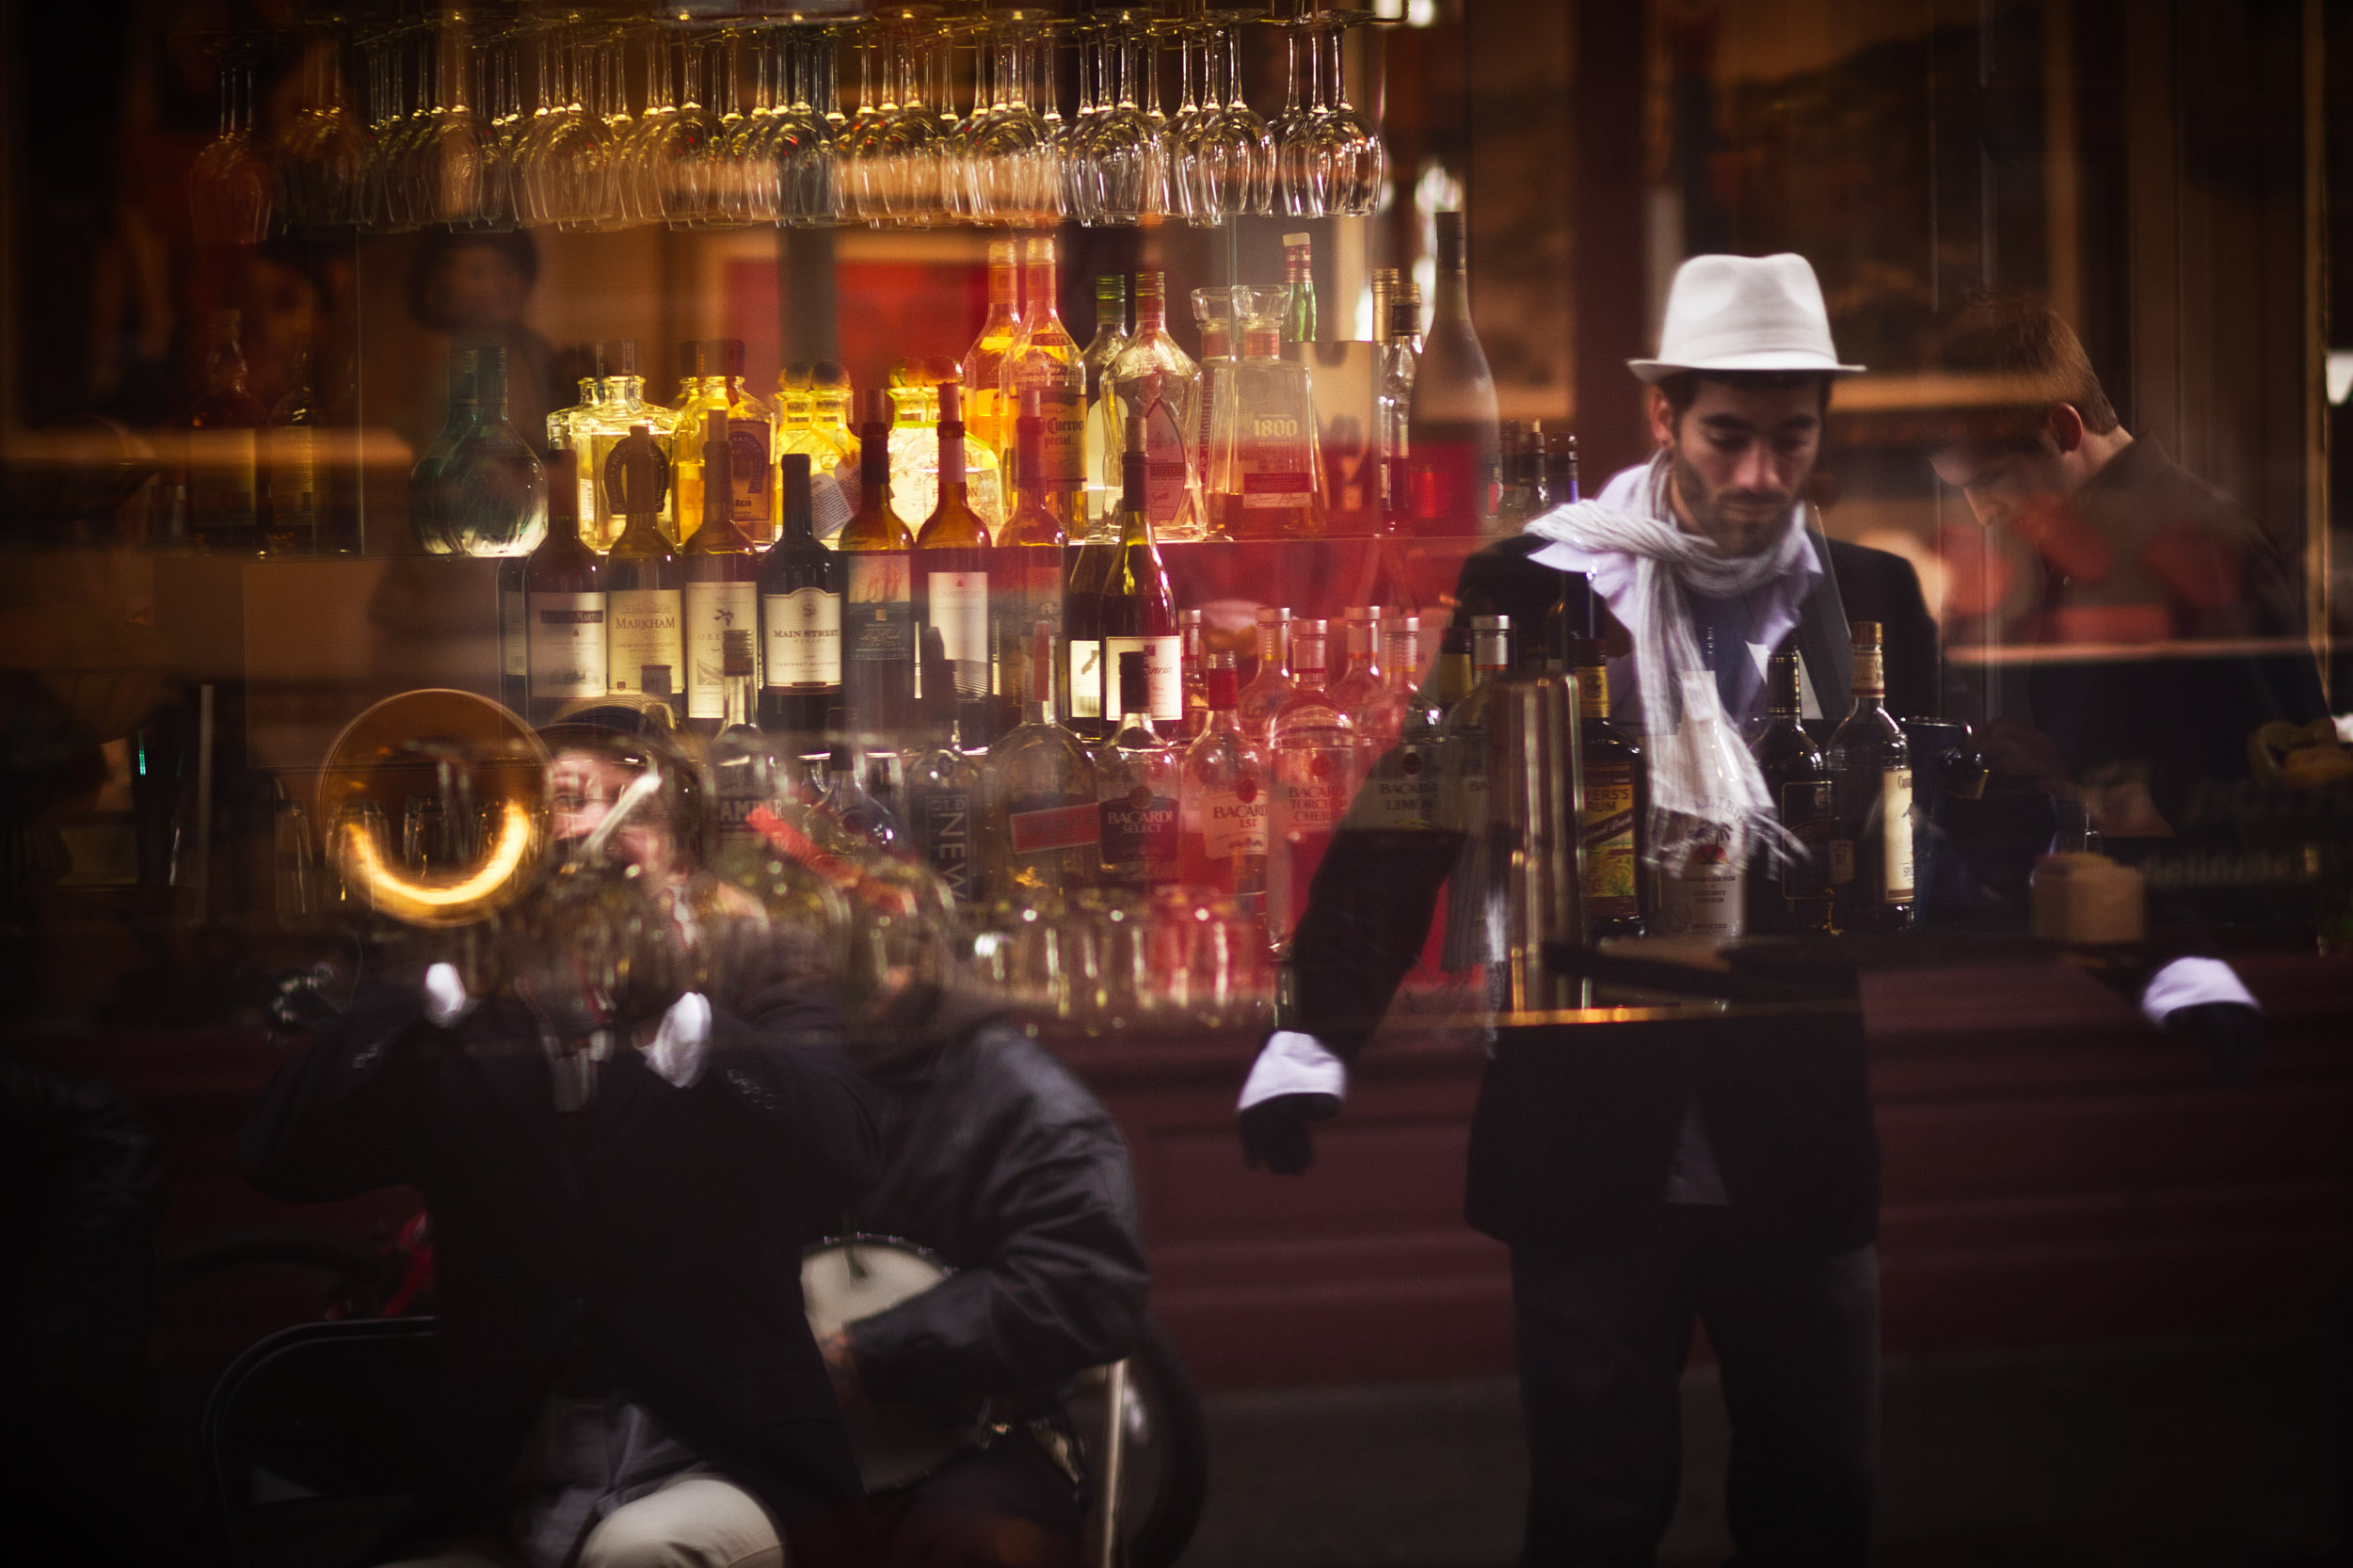 Street buskers entertain while a bartender prepares for the morning rush